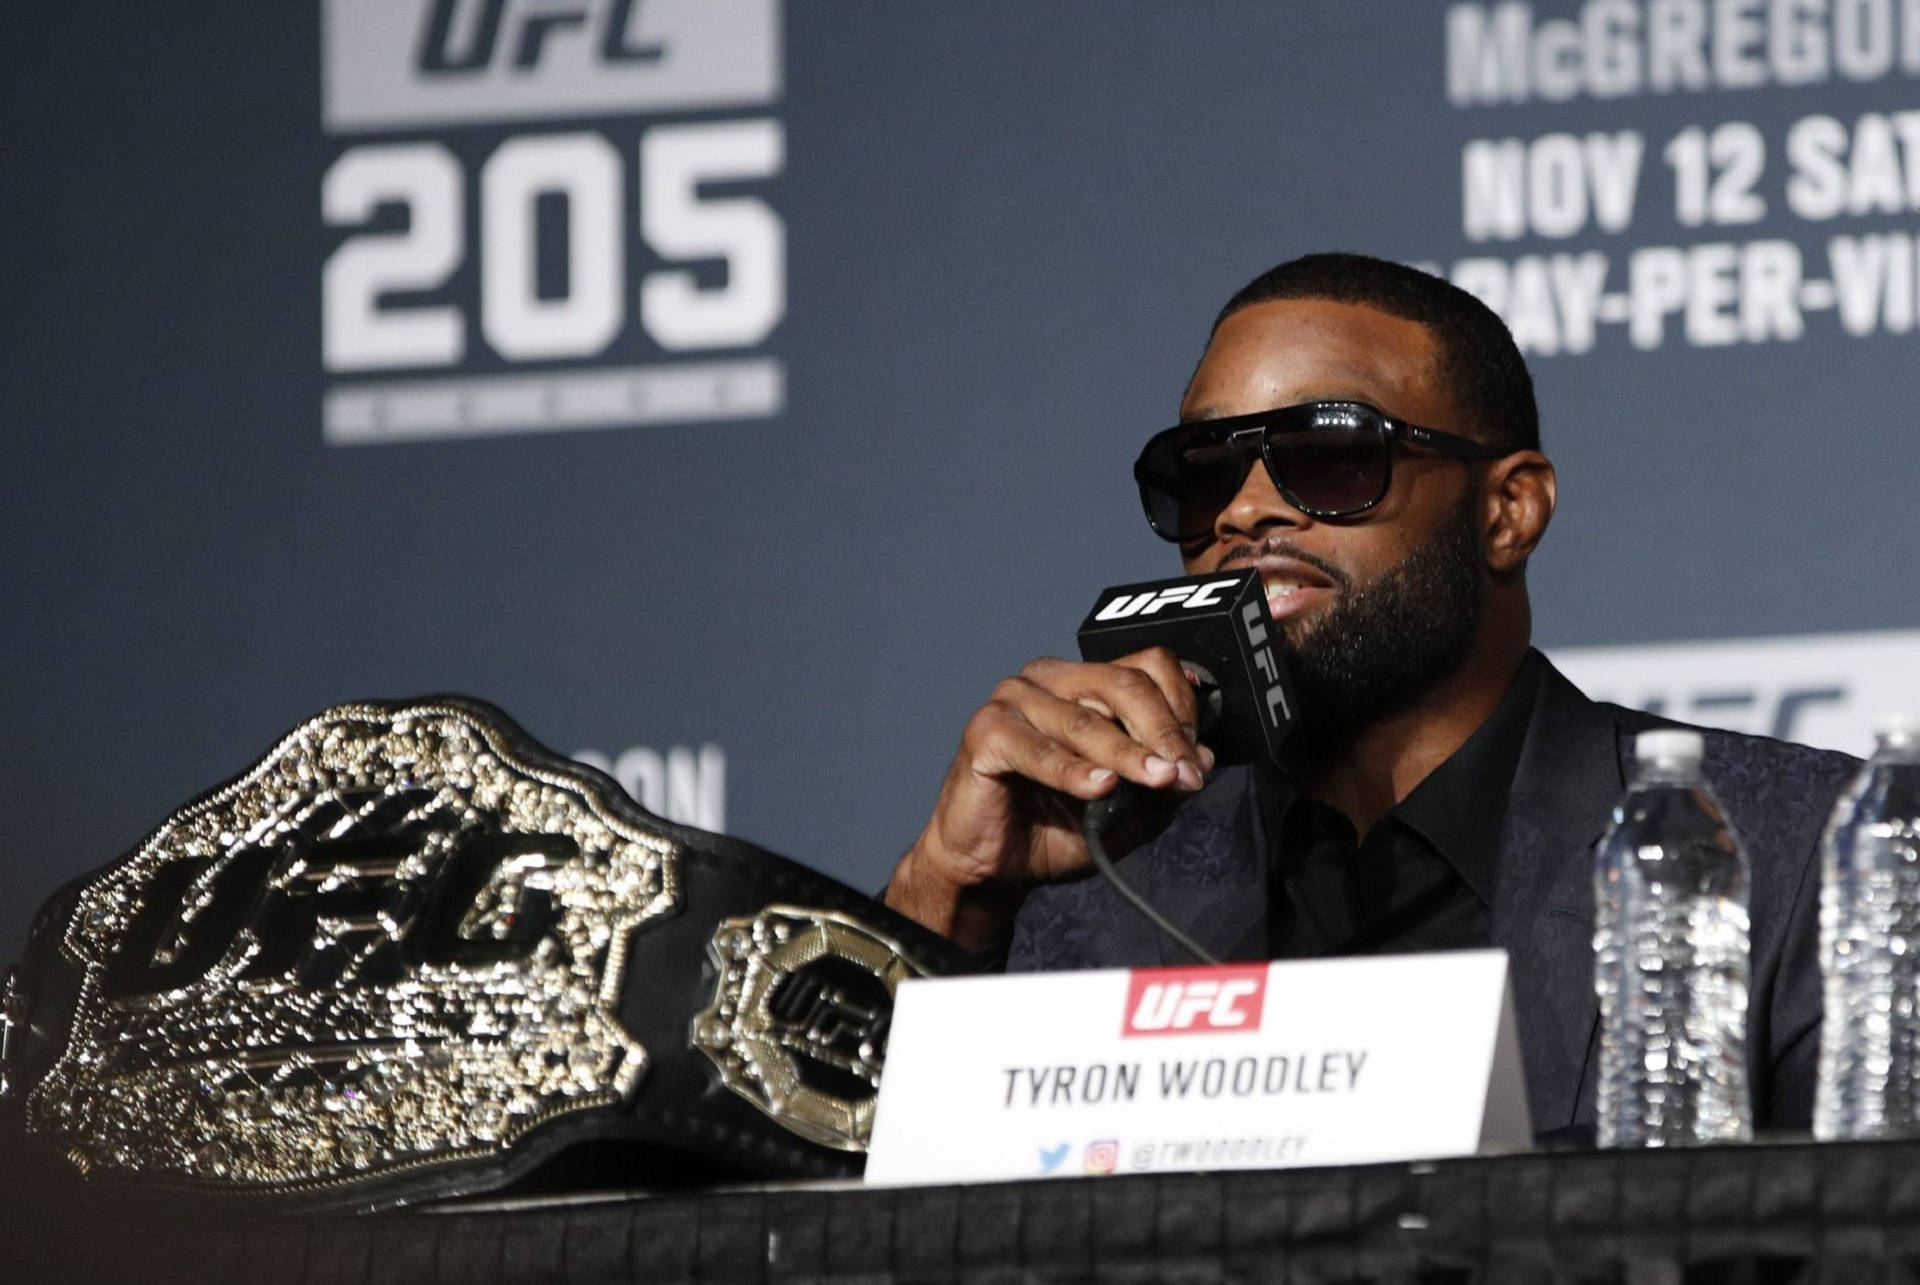 Tyron Woodley Welterweight Champion